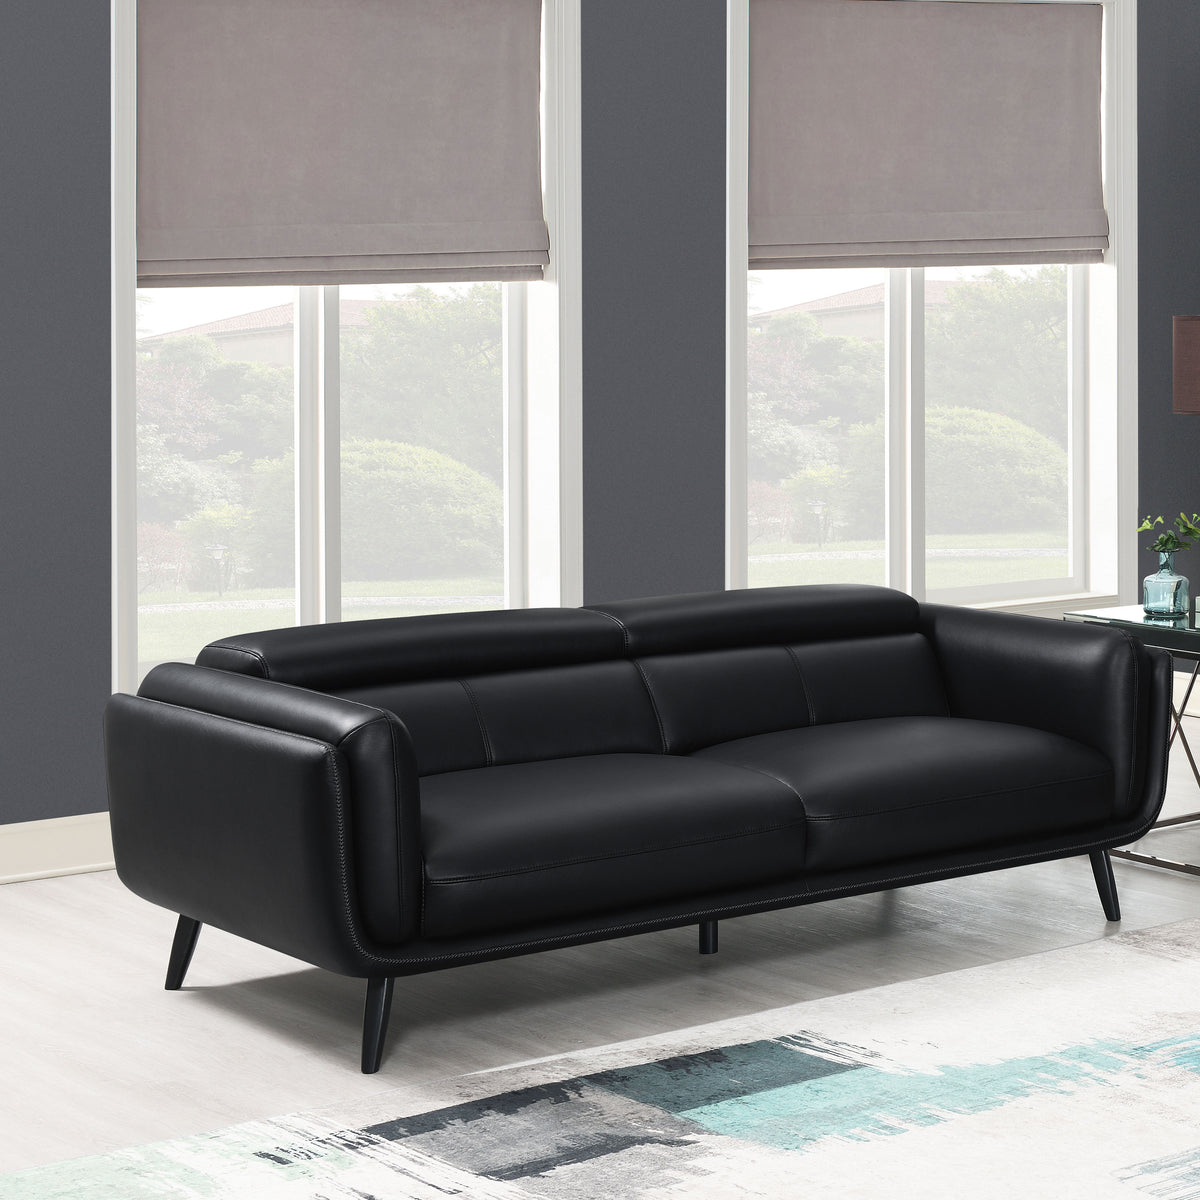 Shania Track Arms Sofa with Tapered Legs Black Shania Track Arms Sofa with Tapered Legs Black Half Price Furniture